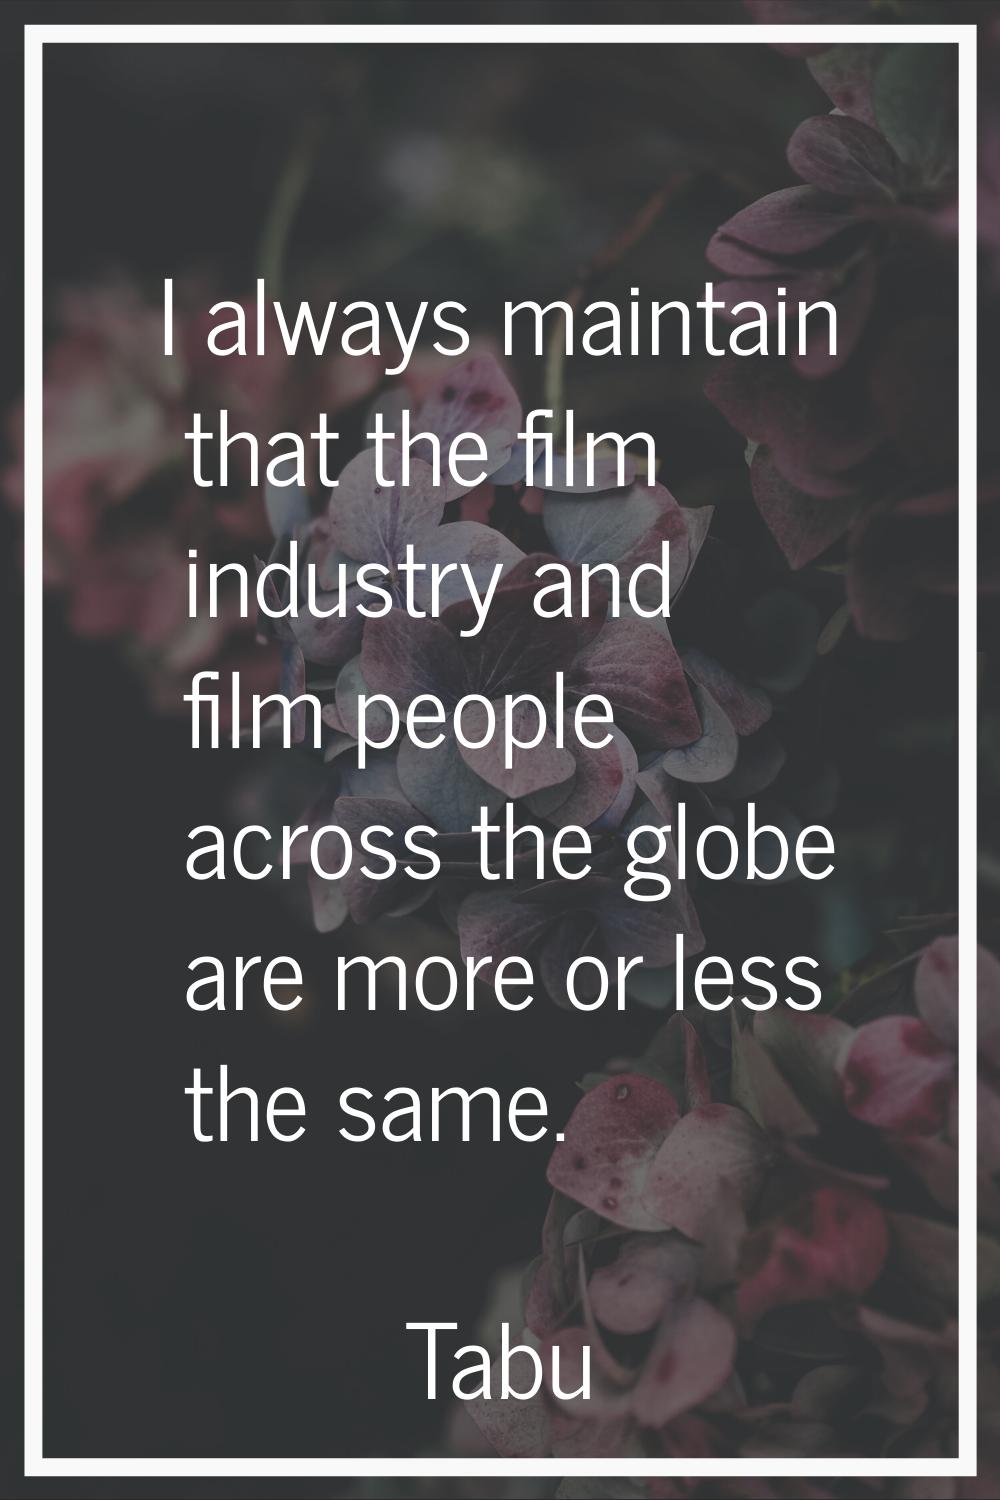 I always maintain that the film industry and film people across the globe are more or less the same